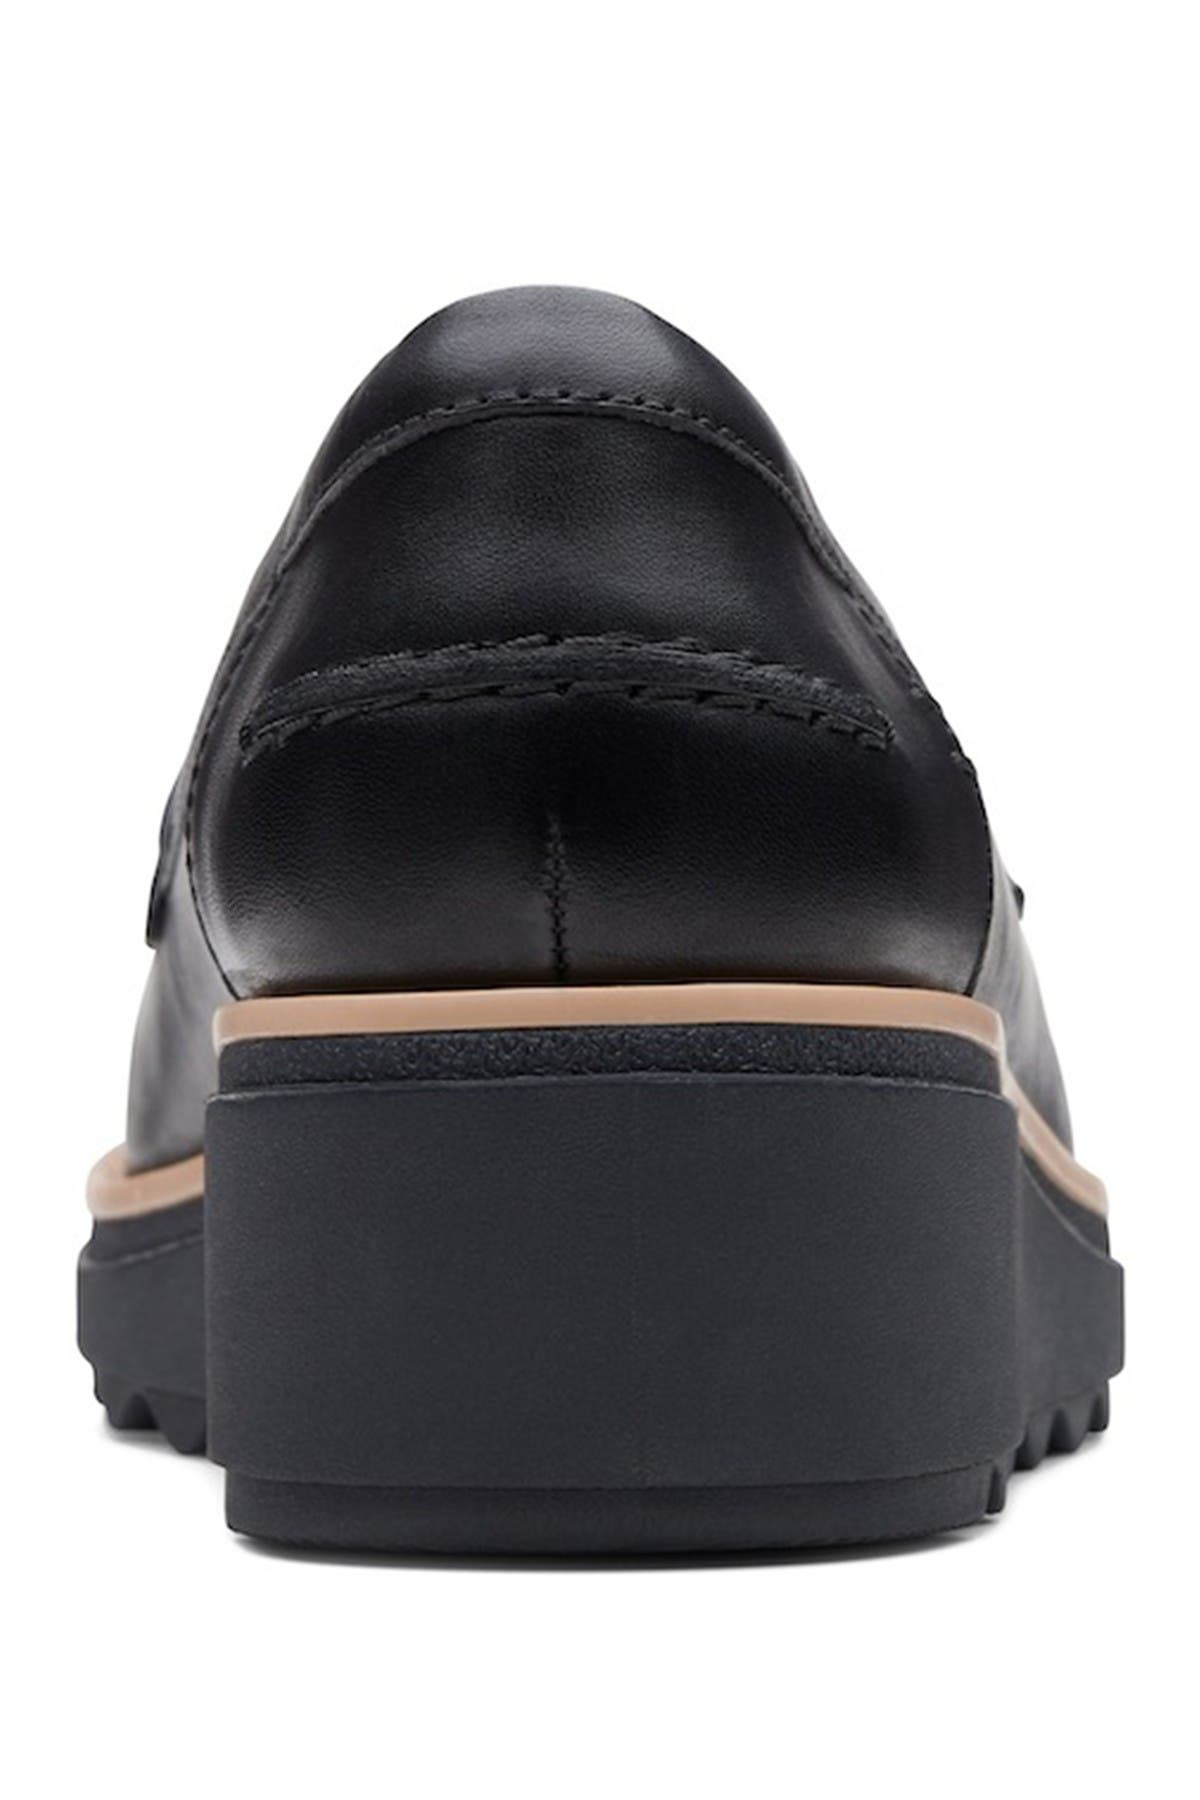 clarks sharon gracie loafers